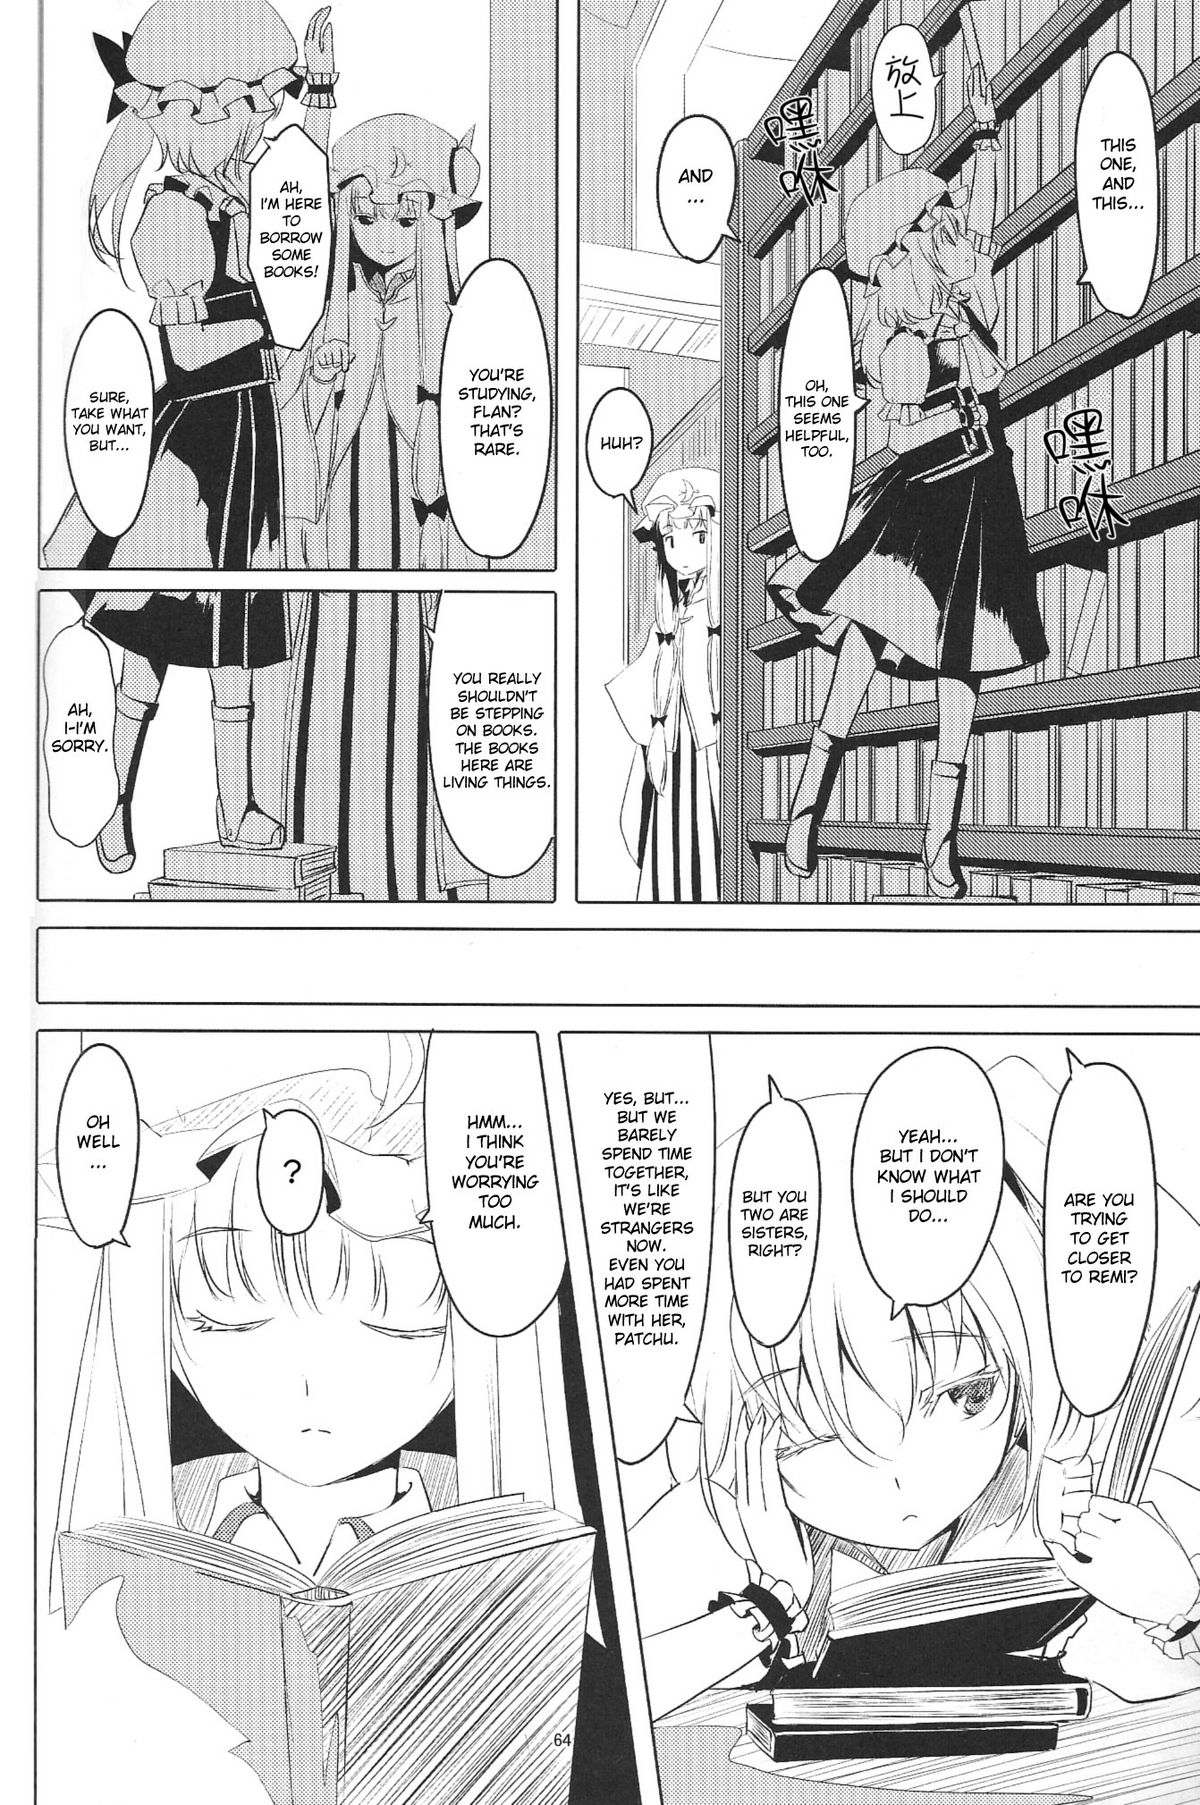 [telomereNA (Gustav)] S-2:Scarlet Sisters (Touhou Project) [English] [desudesu] [Incomplete] page 3 full